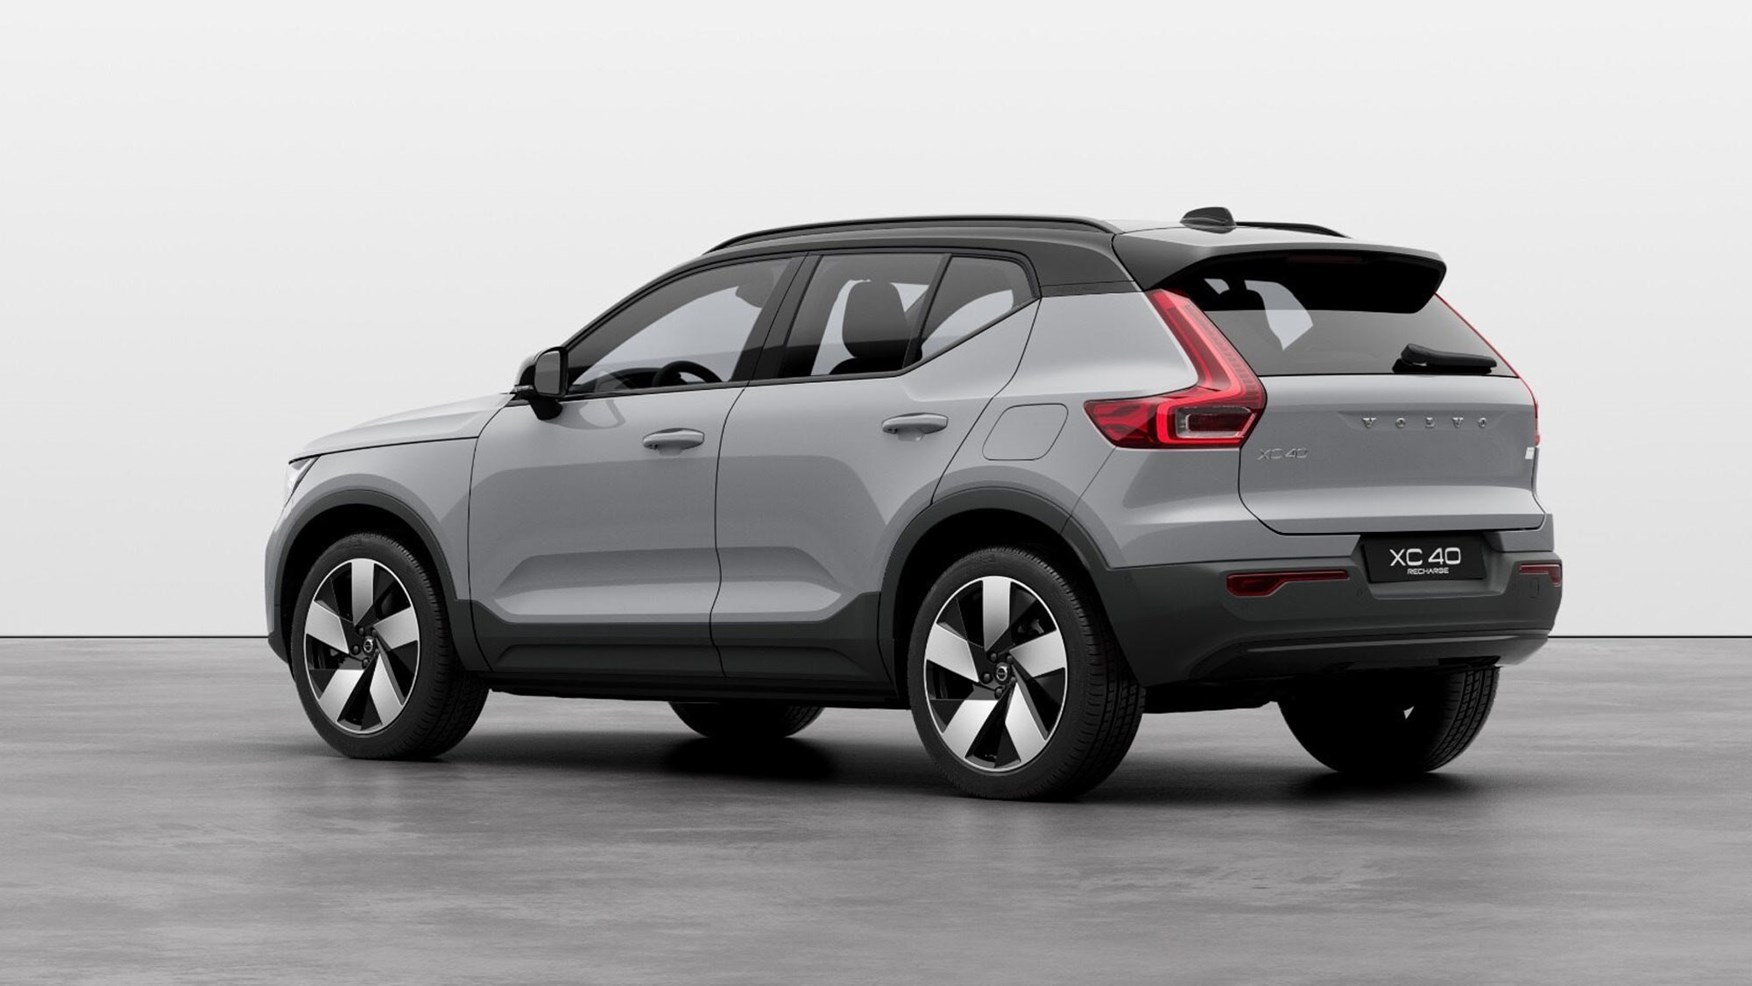 https://car-images.bauersecure.com/wp-images/3692/1752x1168/095-volvo-xc40-recharge-rear.jpg?mode=max&quality=90&scale=down